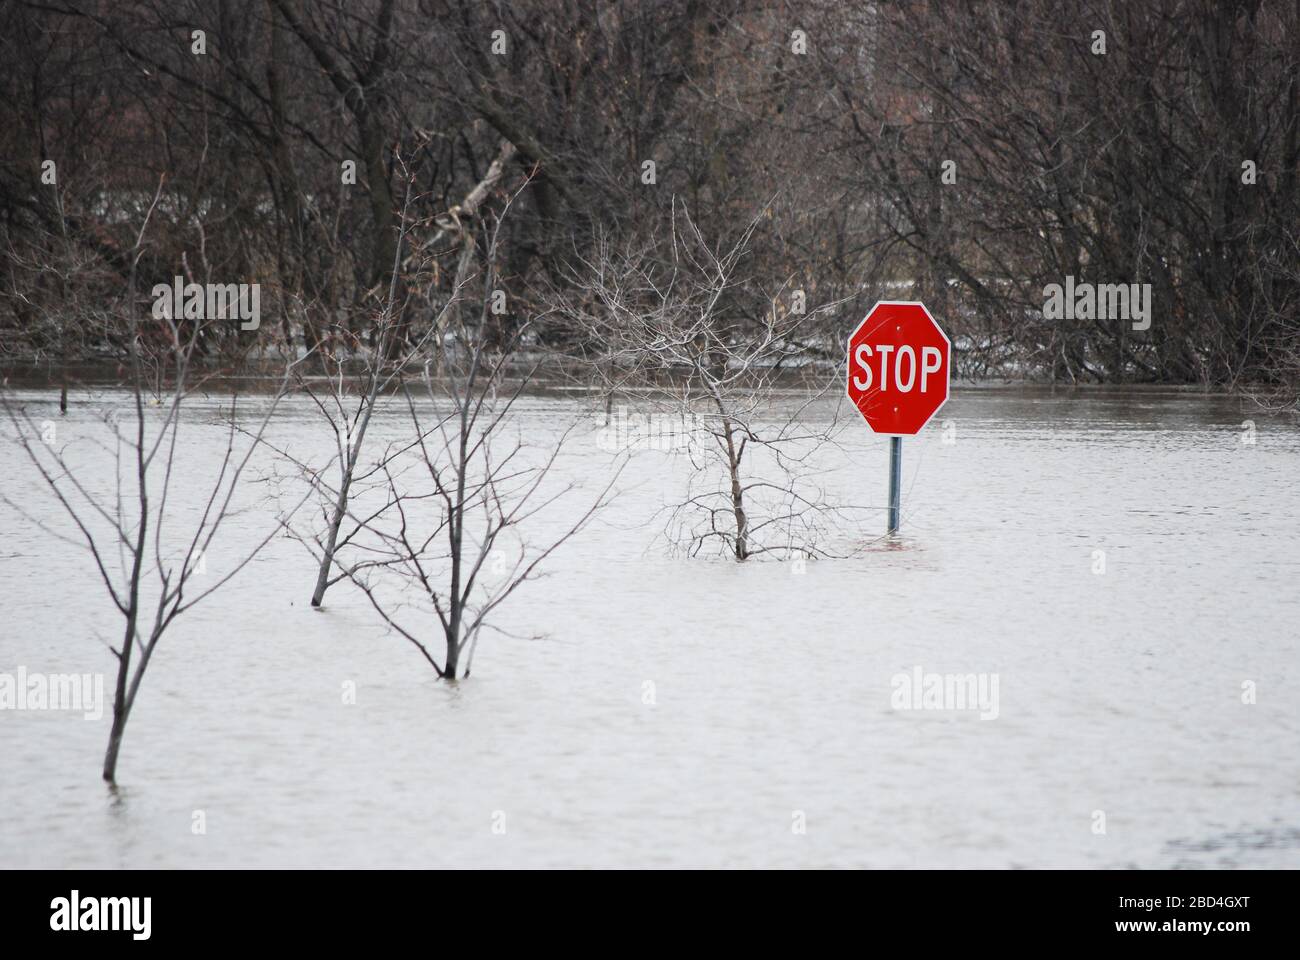 March 18, 2010 - Traffic sign surrounded by floodwater from Red River of the North at Moorhead, MN. Photo taken at 2nd Ave and 3rd St, Moorhead, MN. Stock Photo